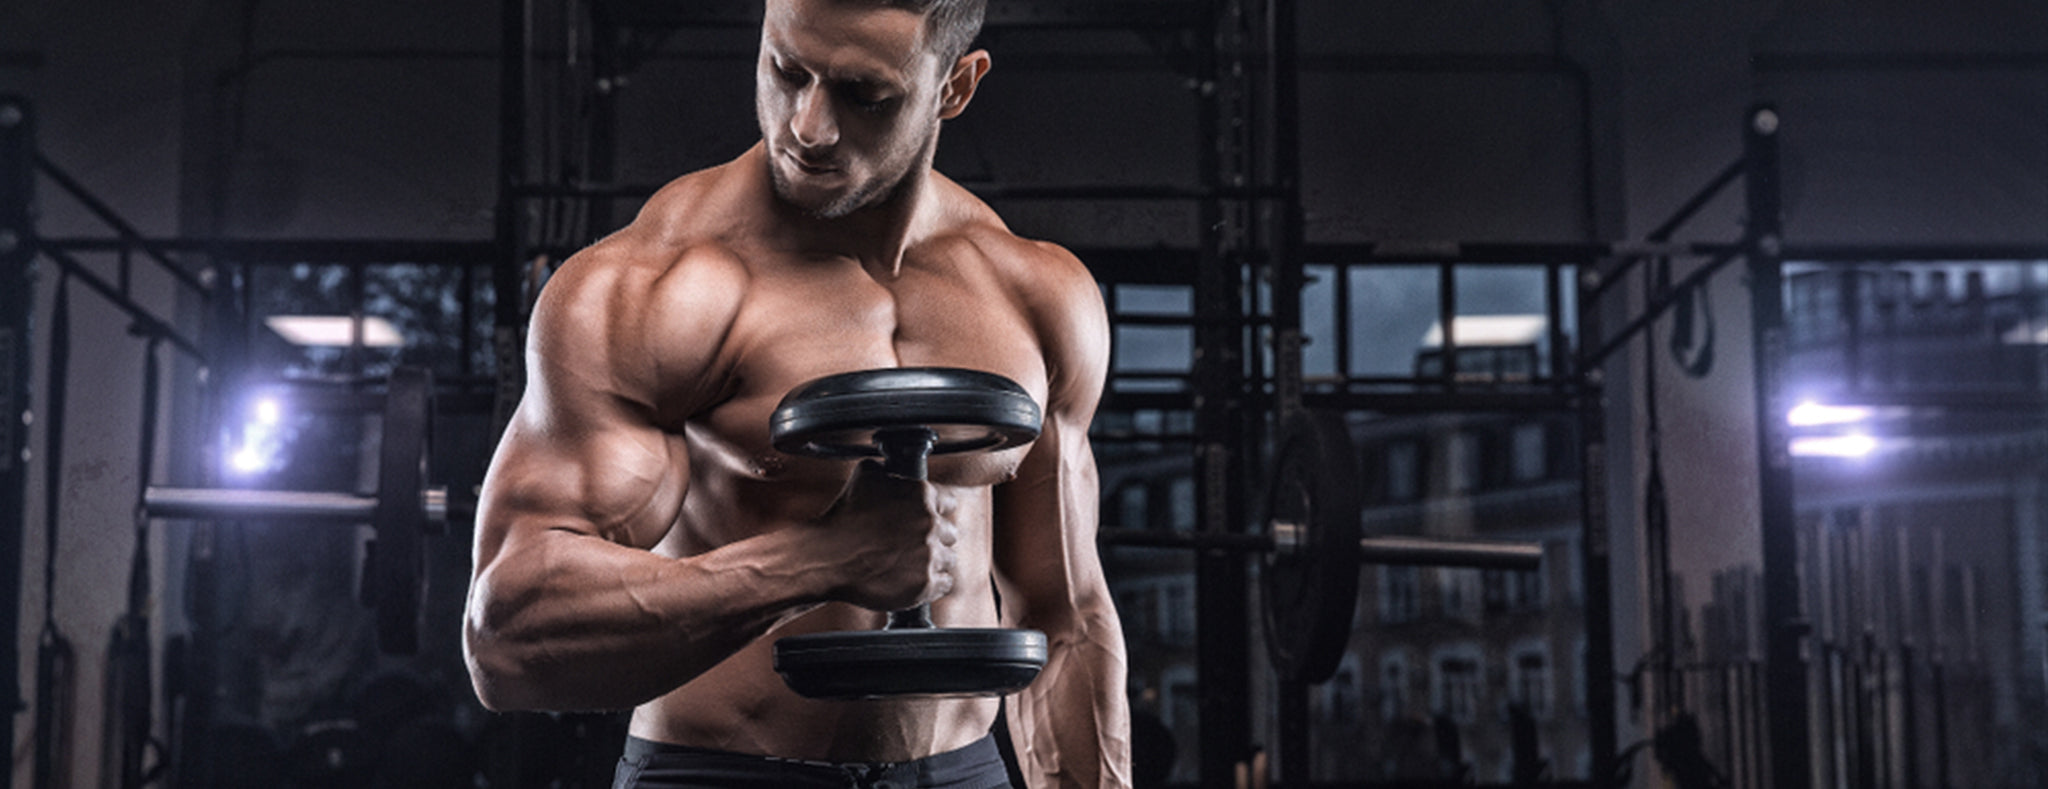 THE BEST BICEP EXERCISES